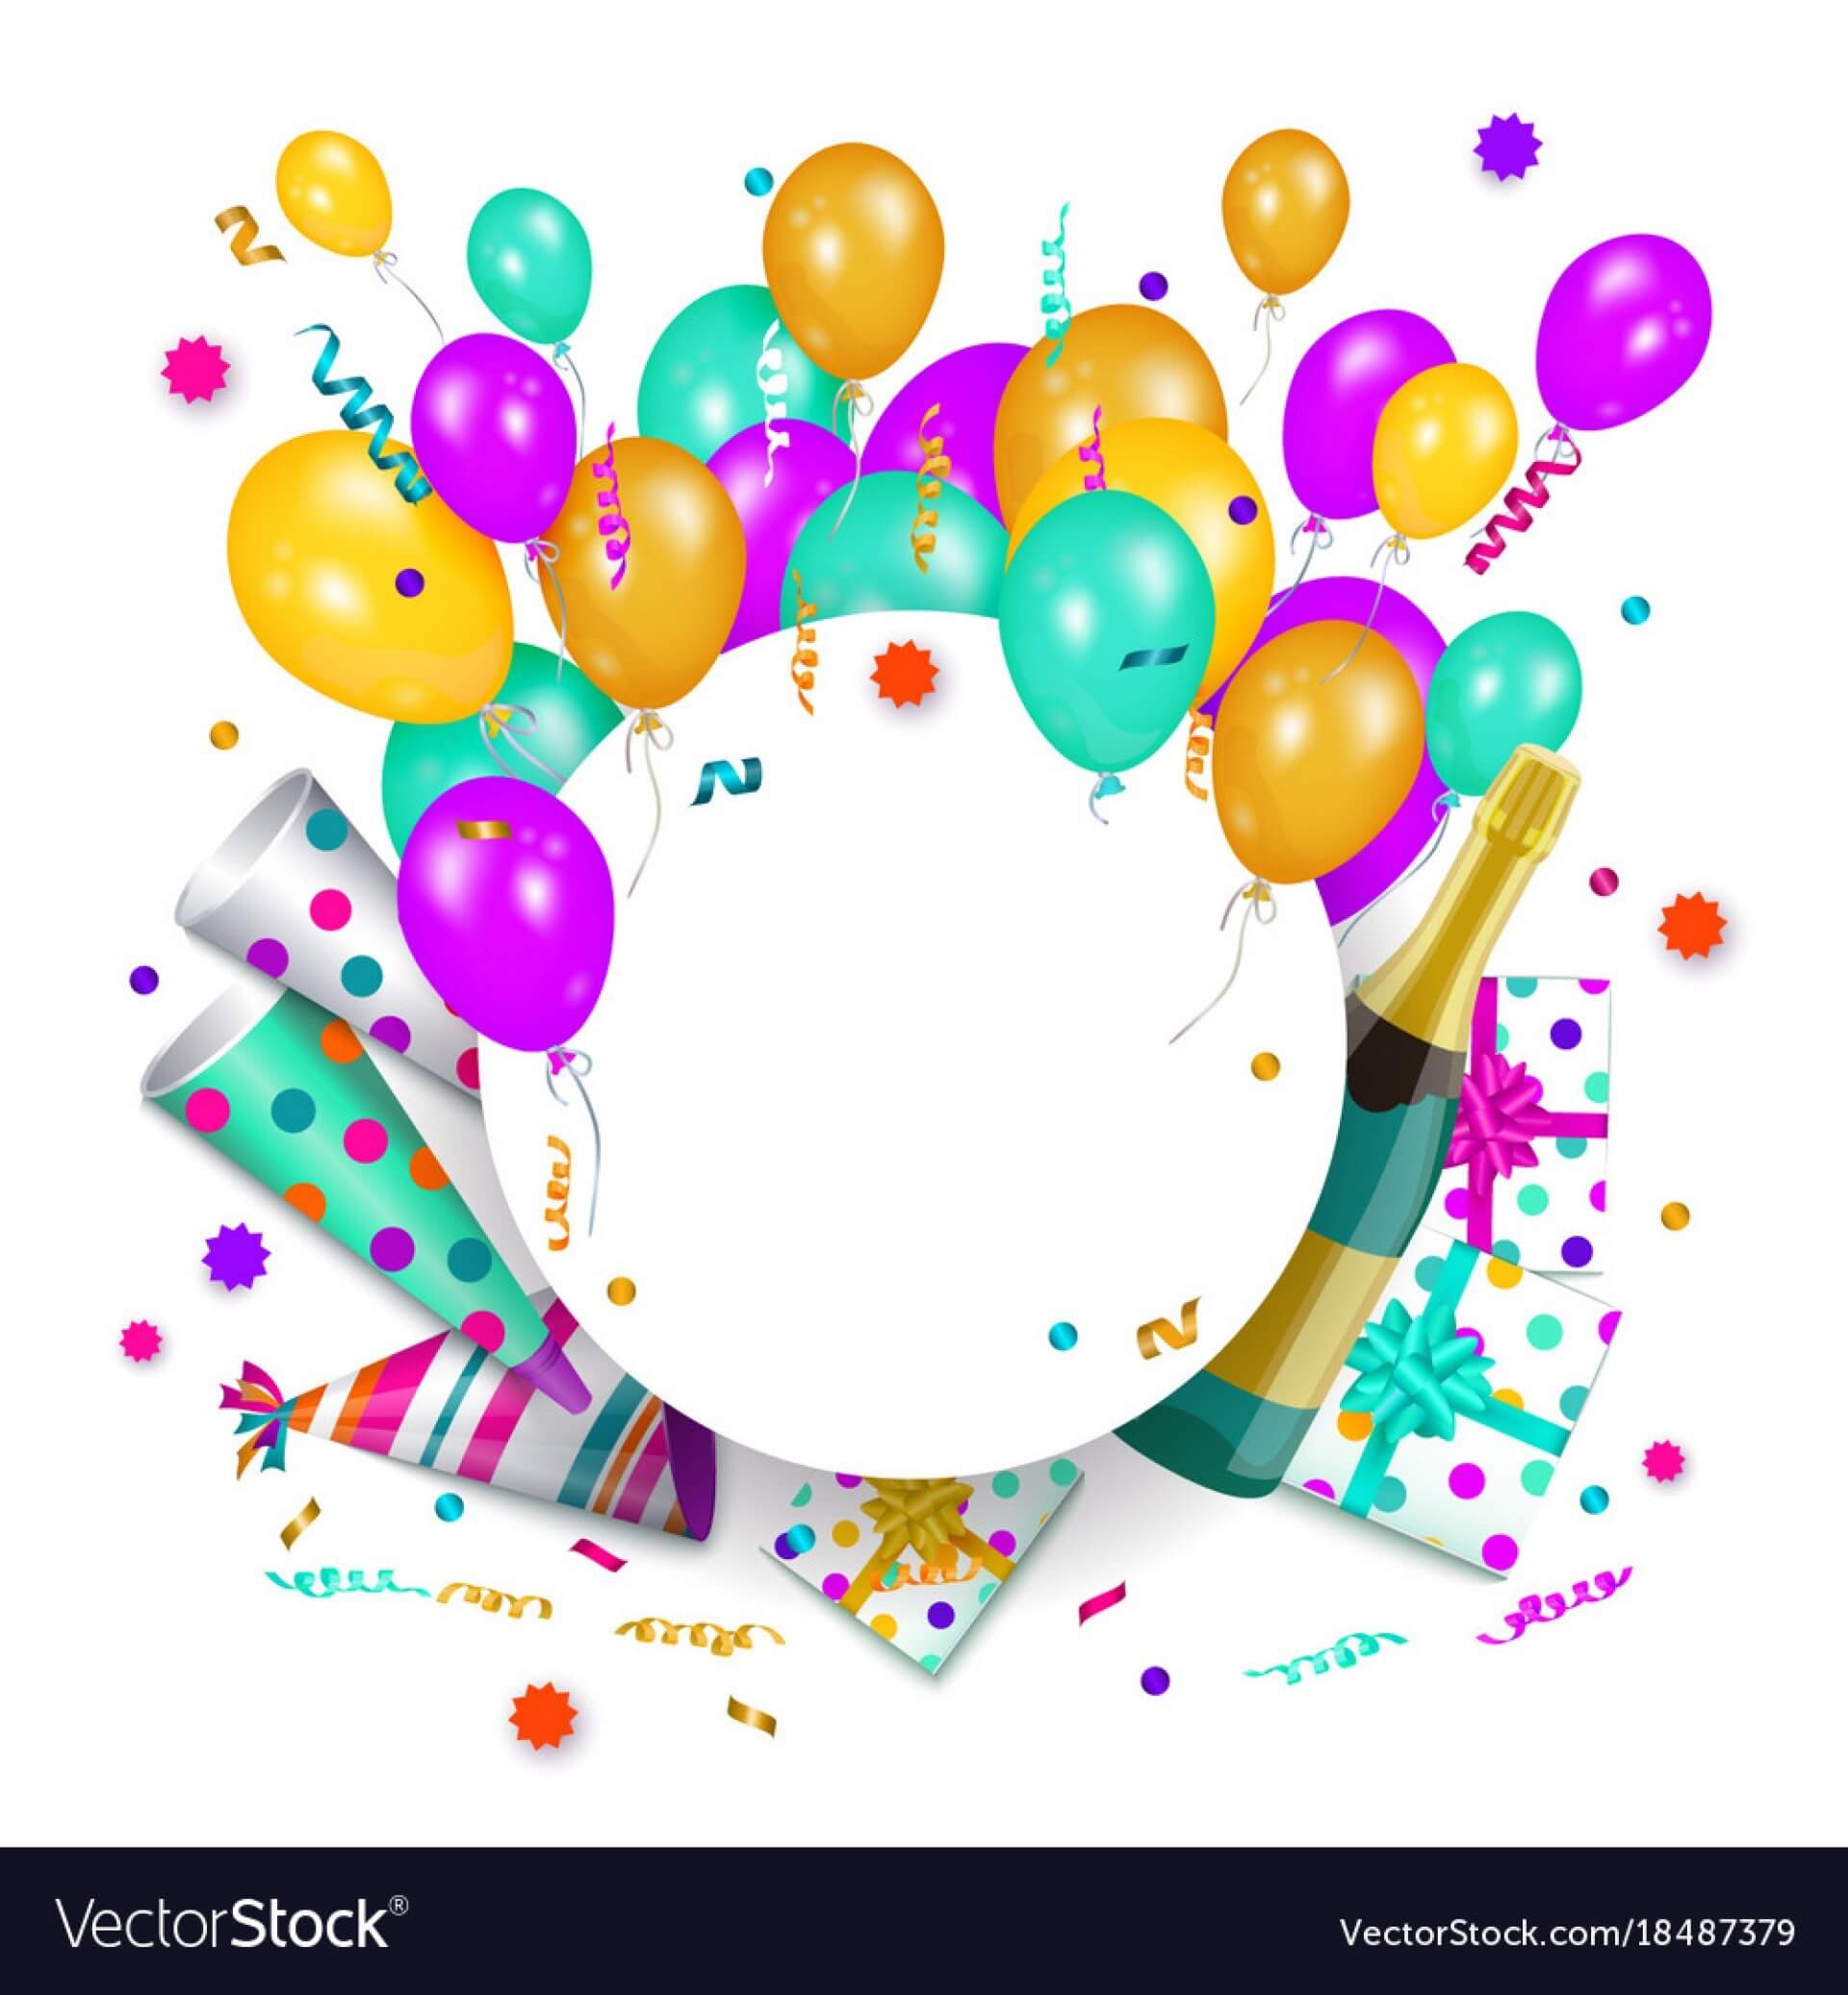 happy-birthday-poster-template-free-printable-templates